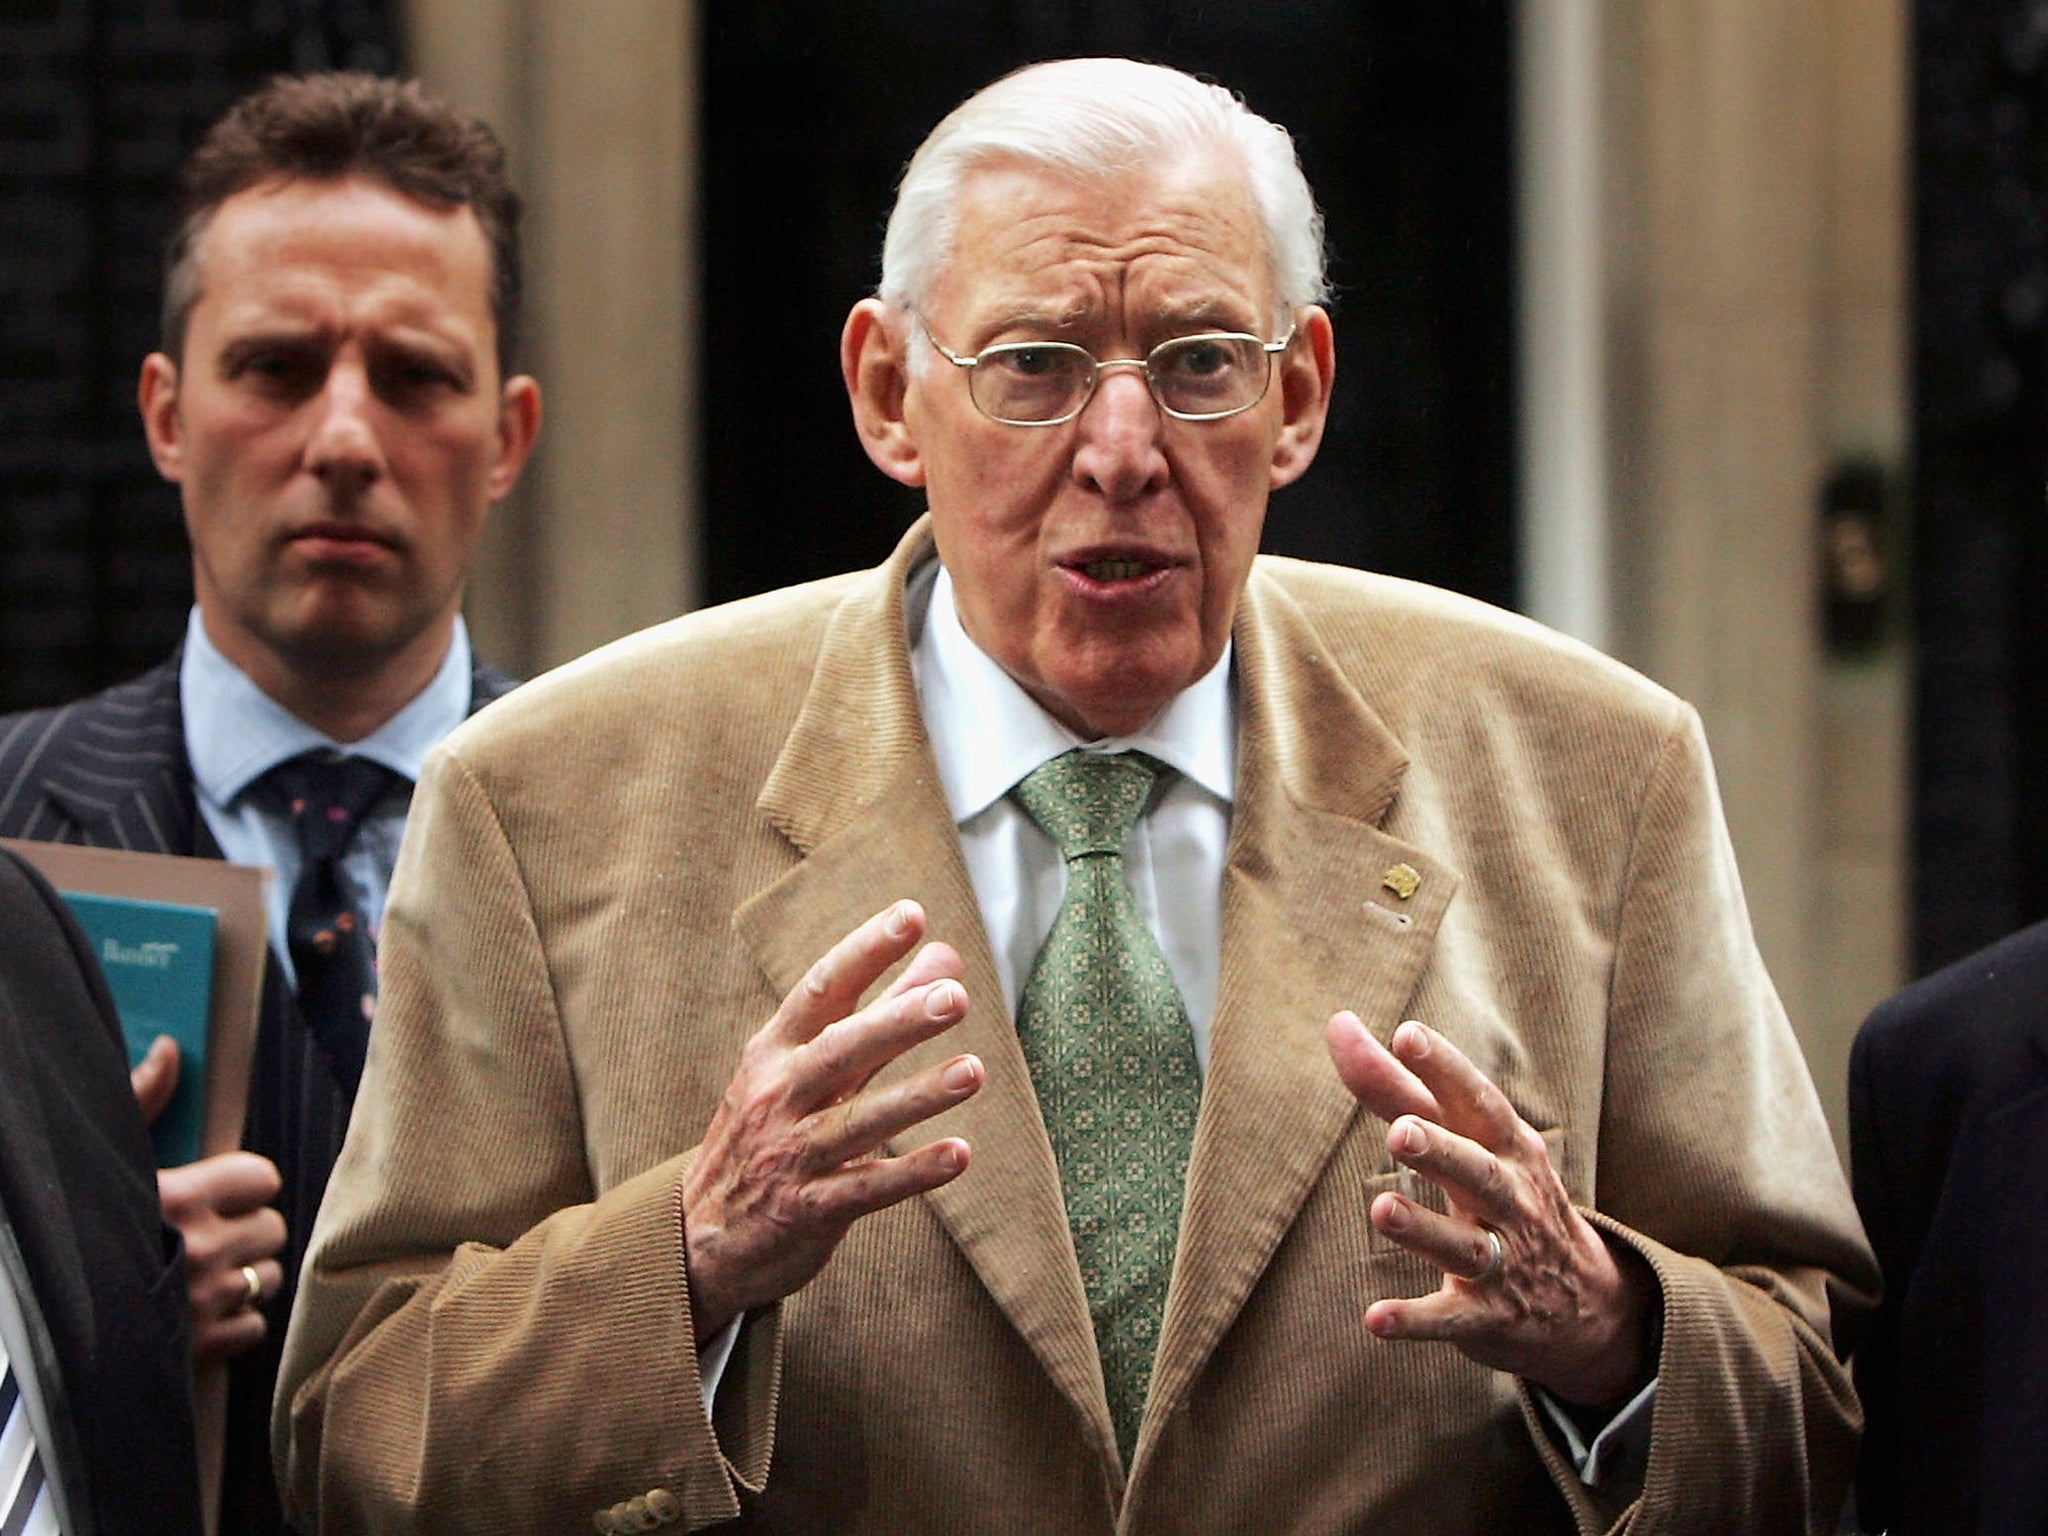 Ian Paisley Jnr (left) is the son of the founder of the DUP, Reverend Ian Paisley